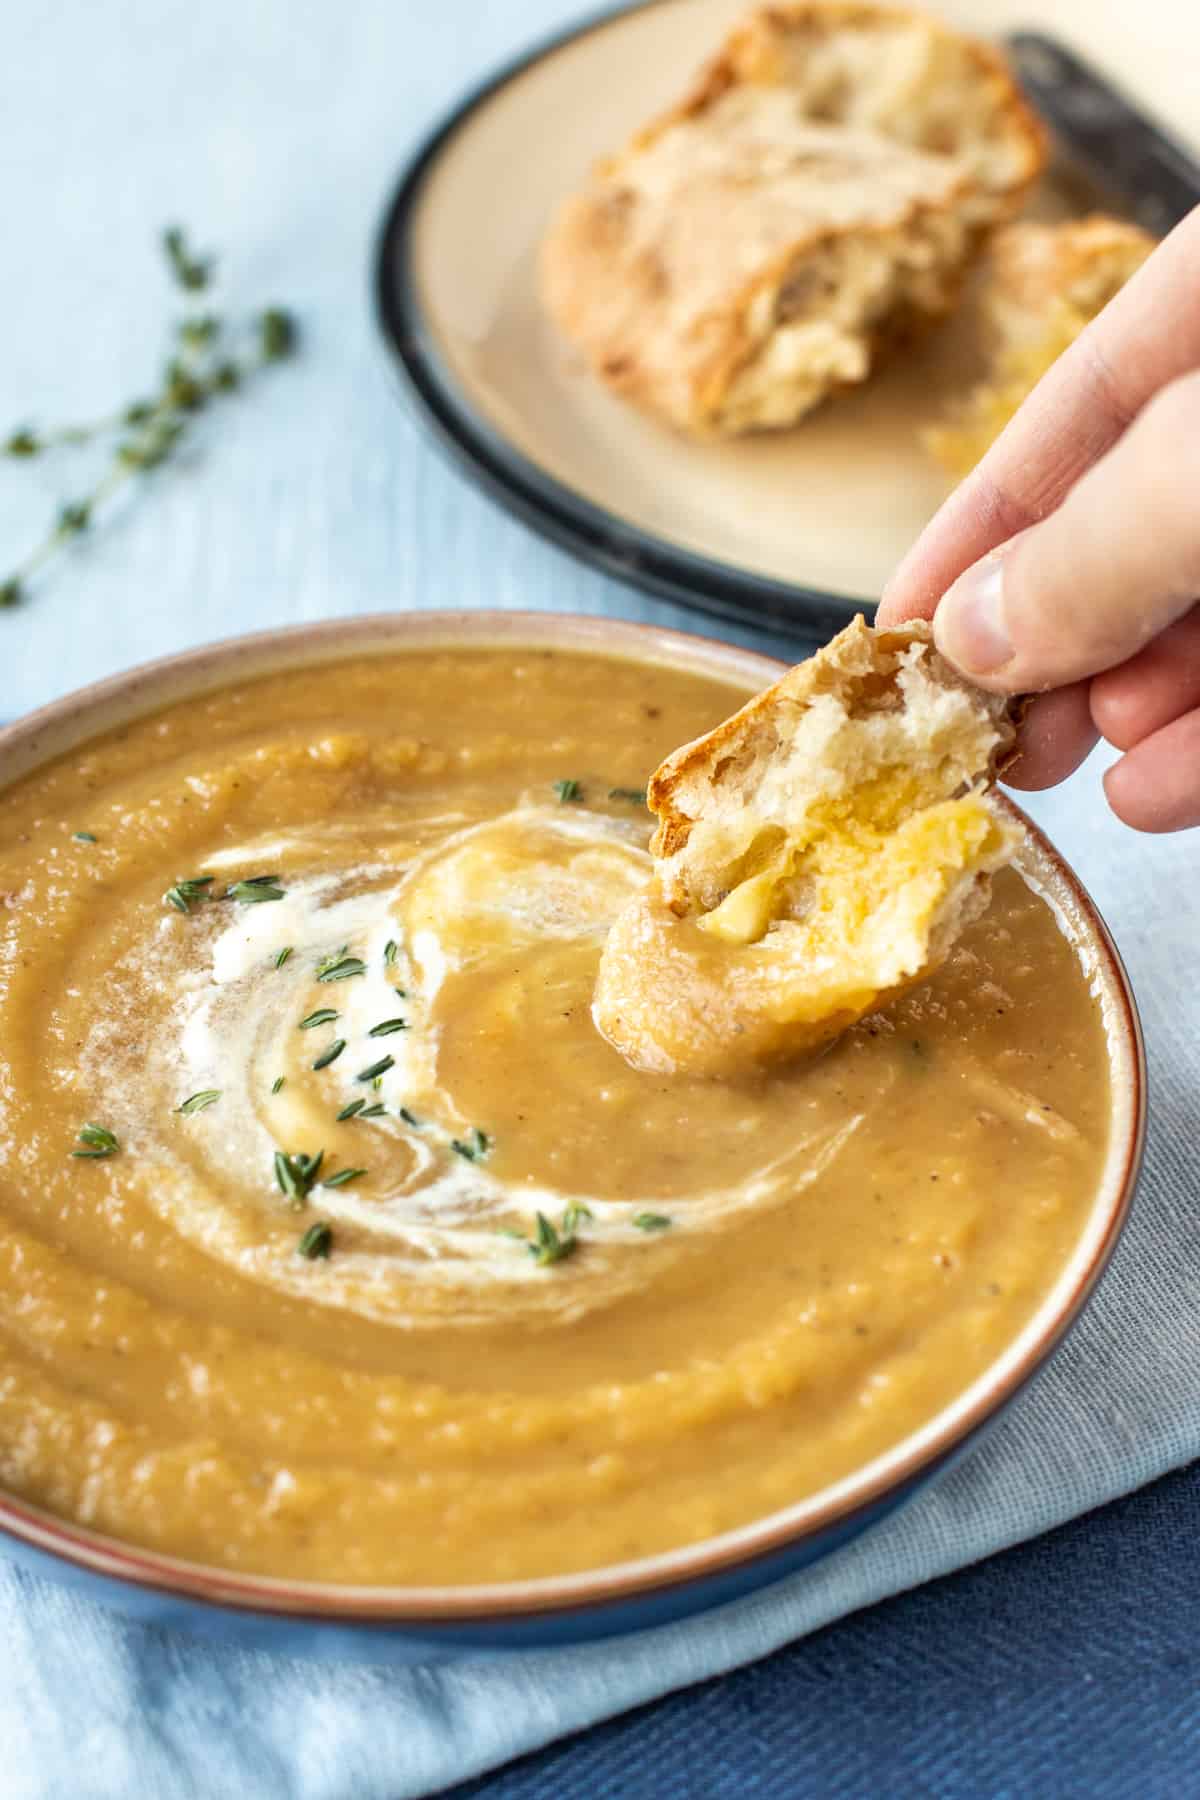 A hand dipping a piece of crusty bread and butter into a bowl of parsnip soup.